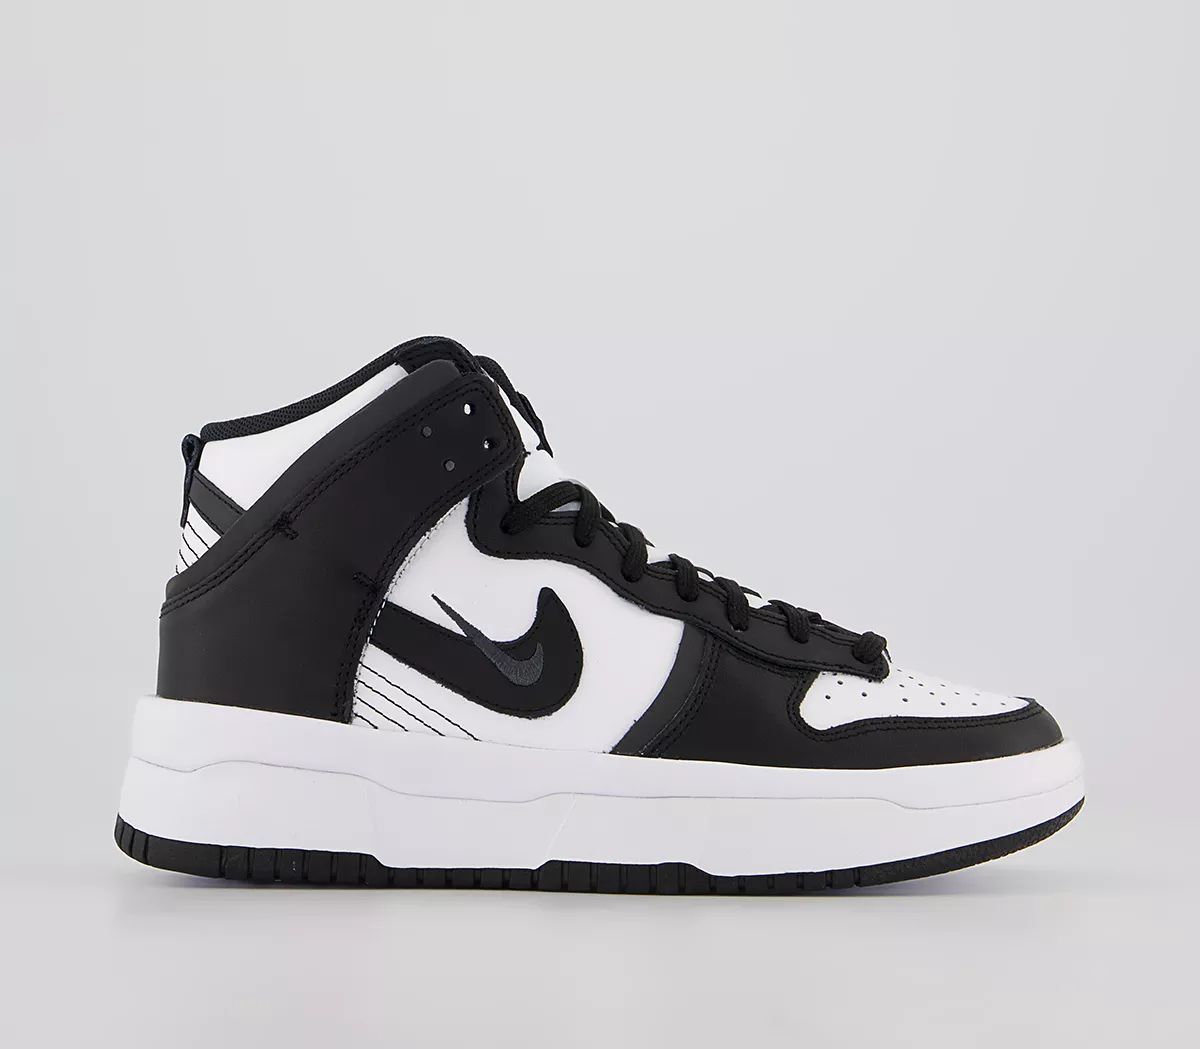 Nike Dunk High Up Trainers White Black Smoke Grey - Women's Trainers | Offspring (UK)